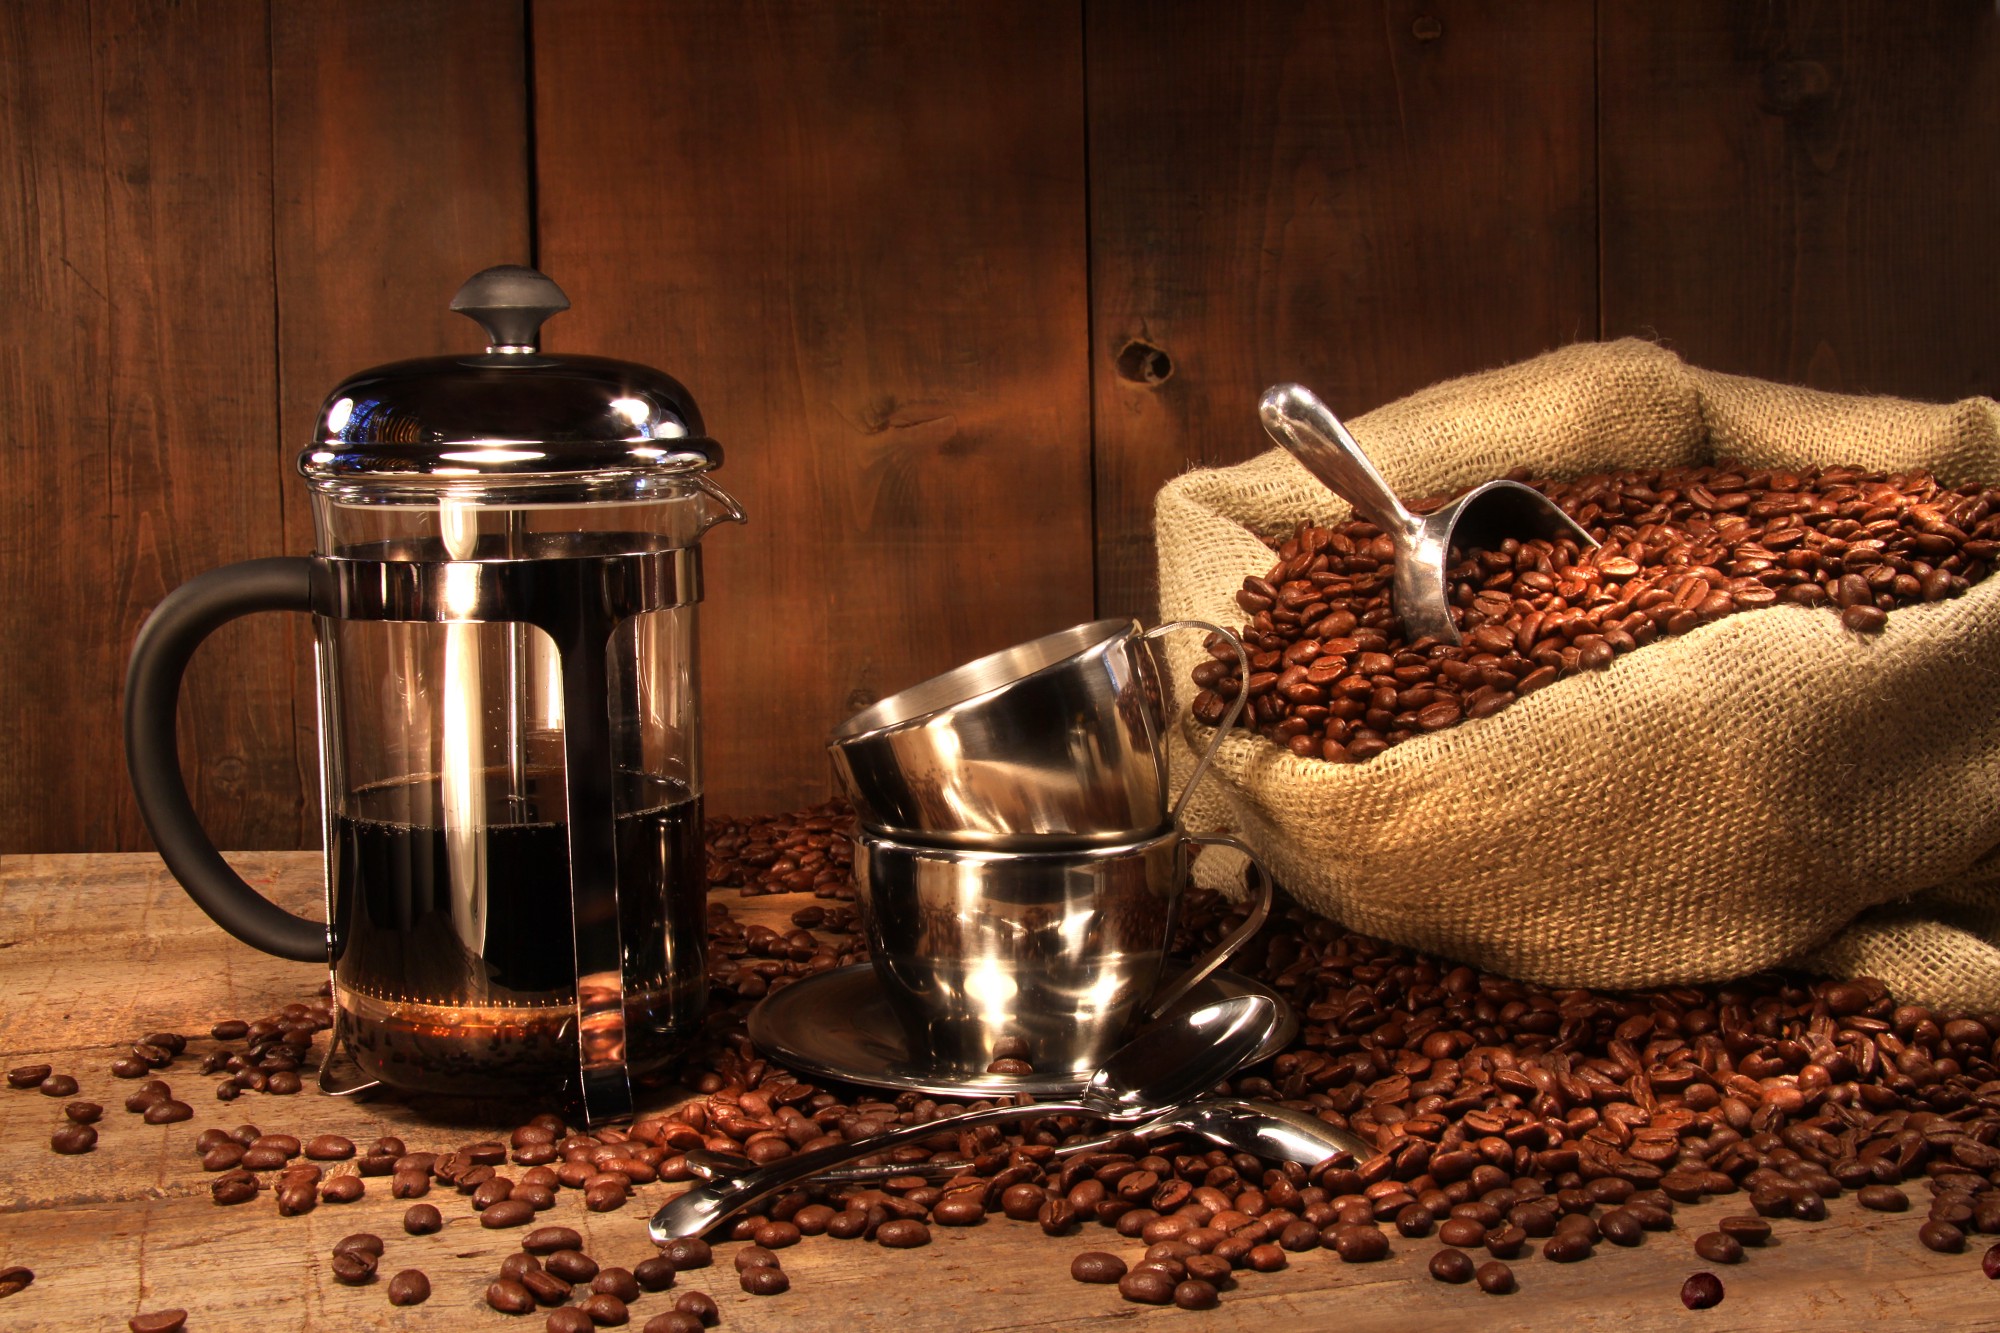 Why I Spend 10 Minutes Every Day Making Coffee in A French Press